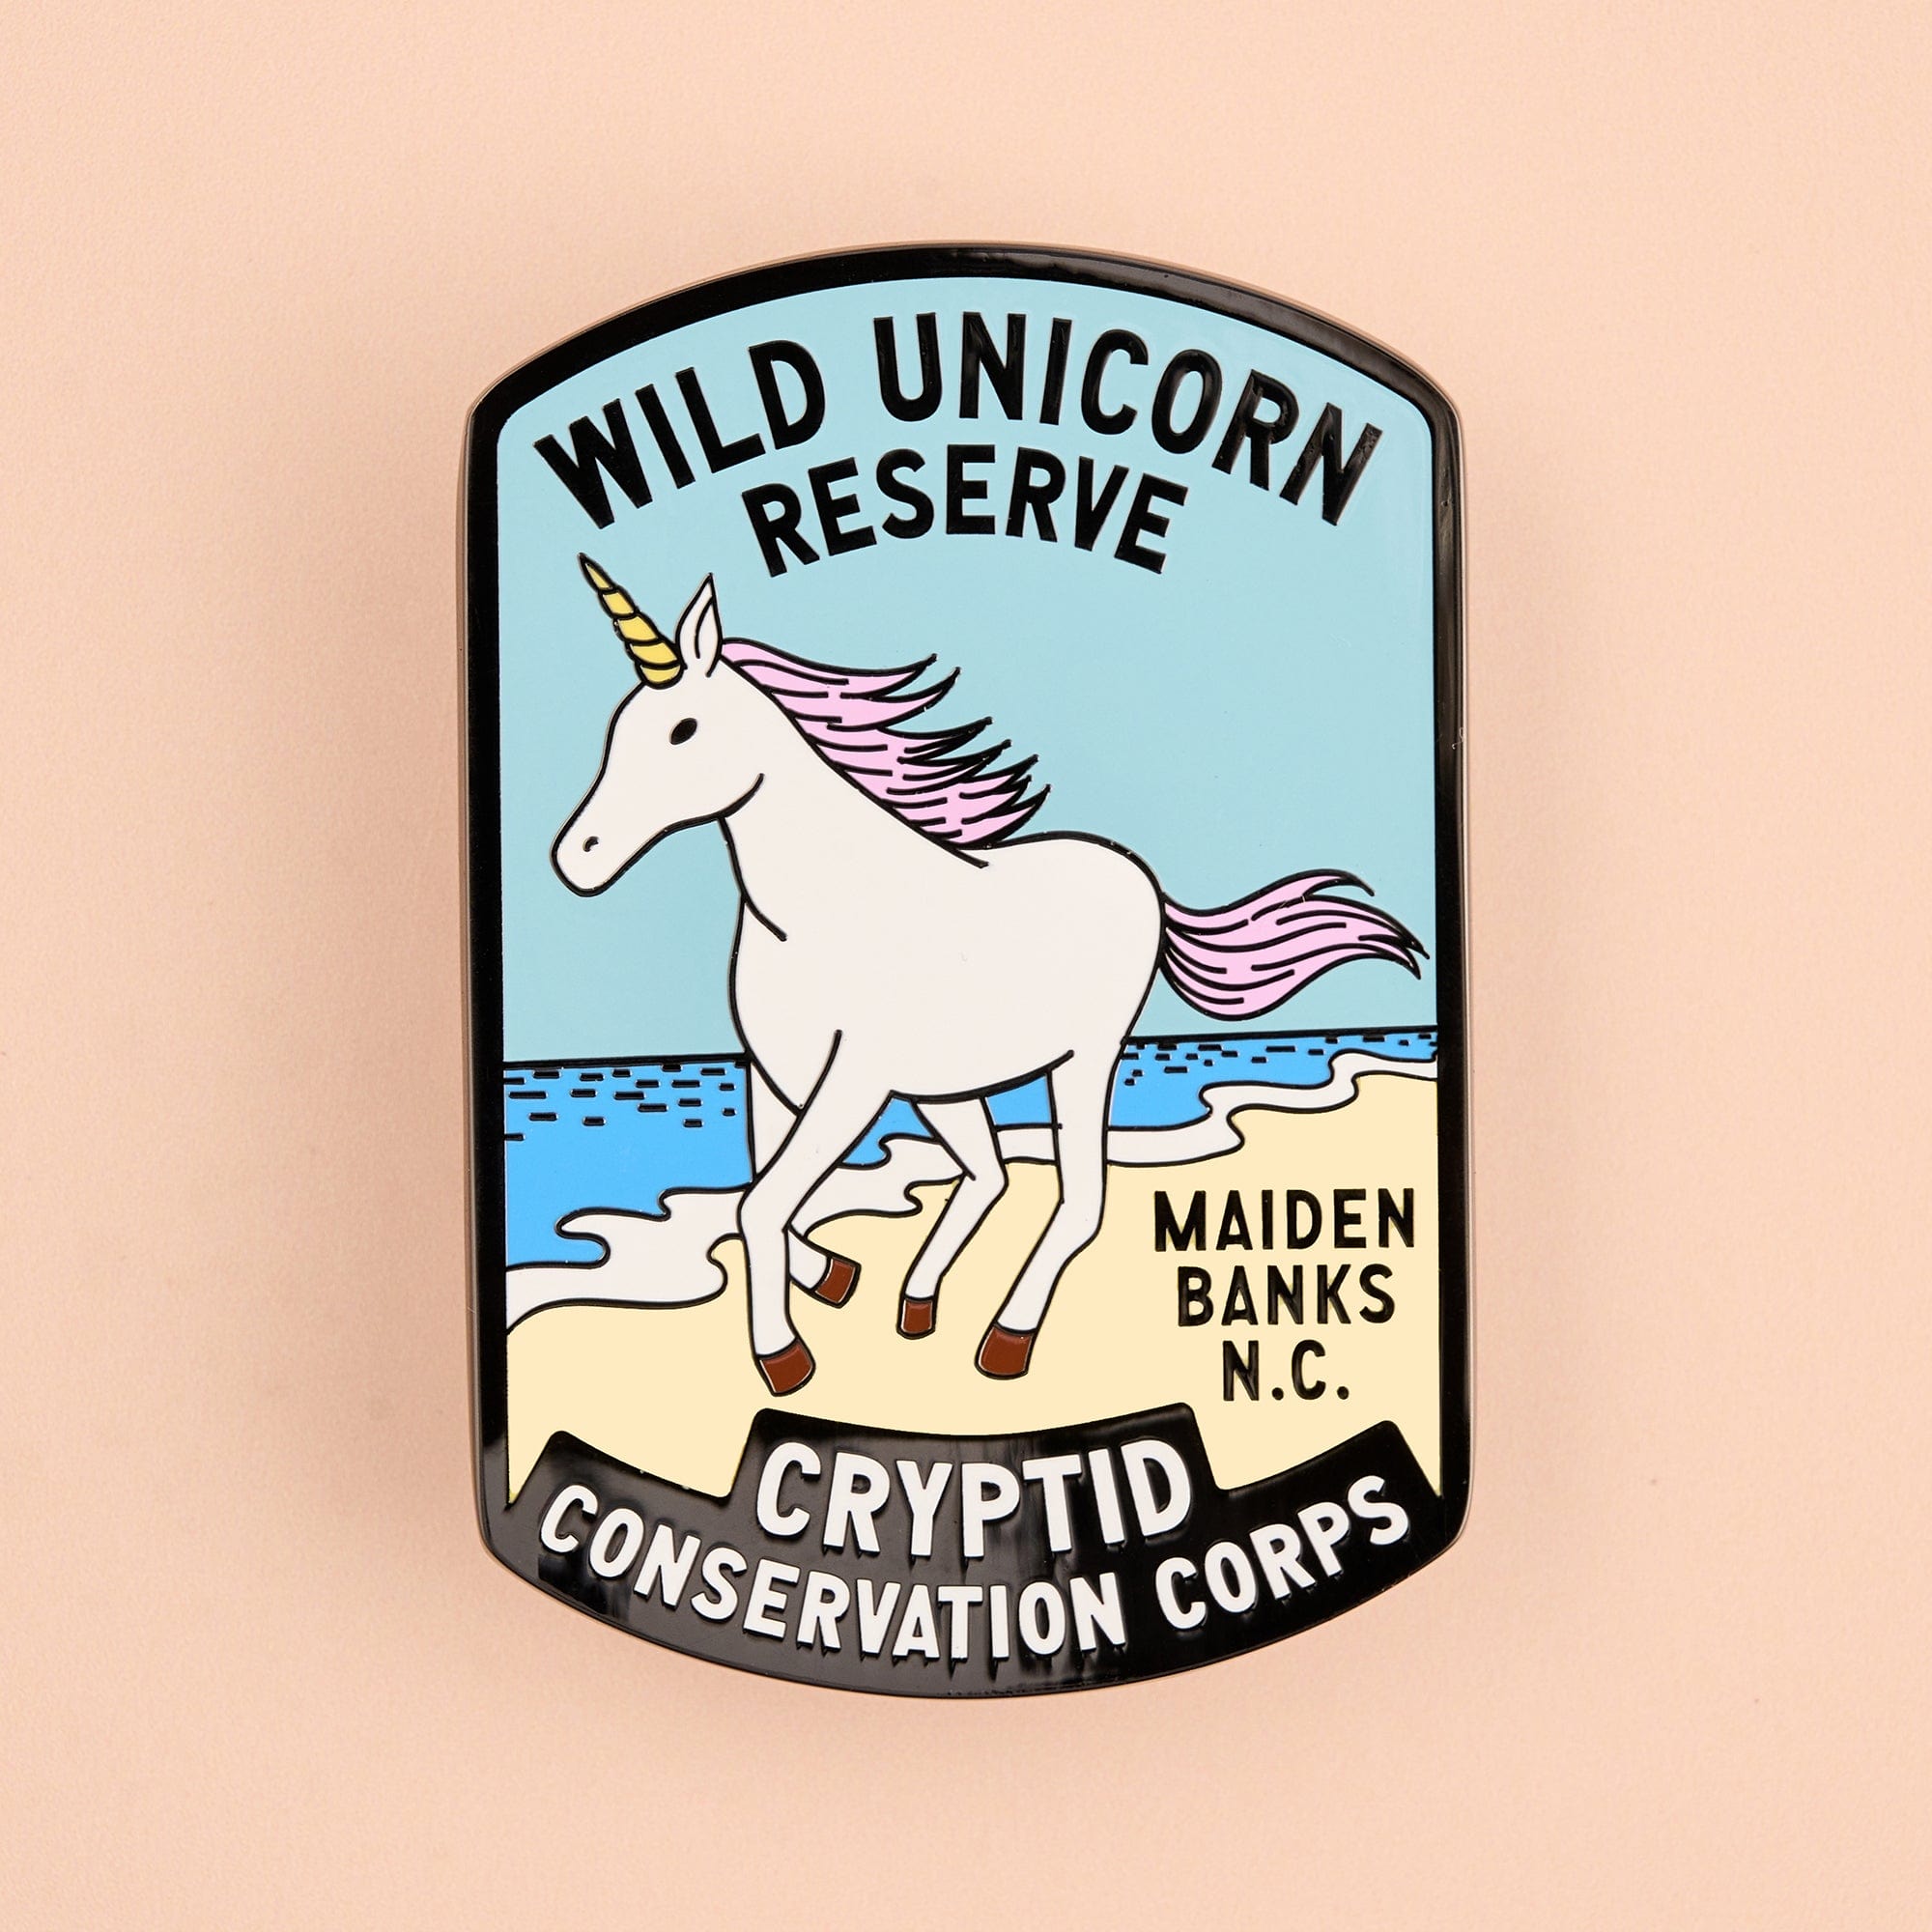 Cryptid Conservation Corps: Three Pin Set